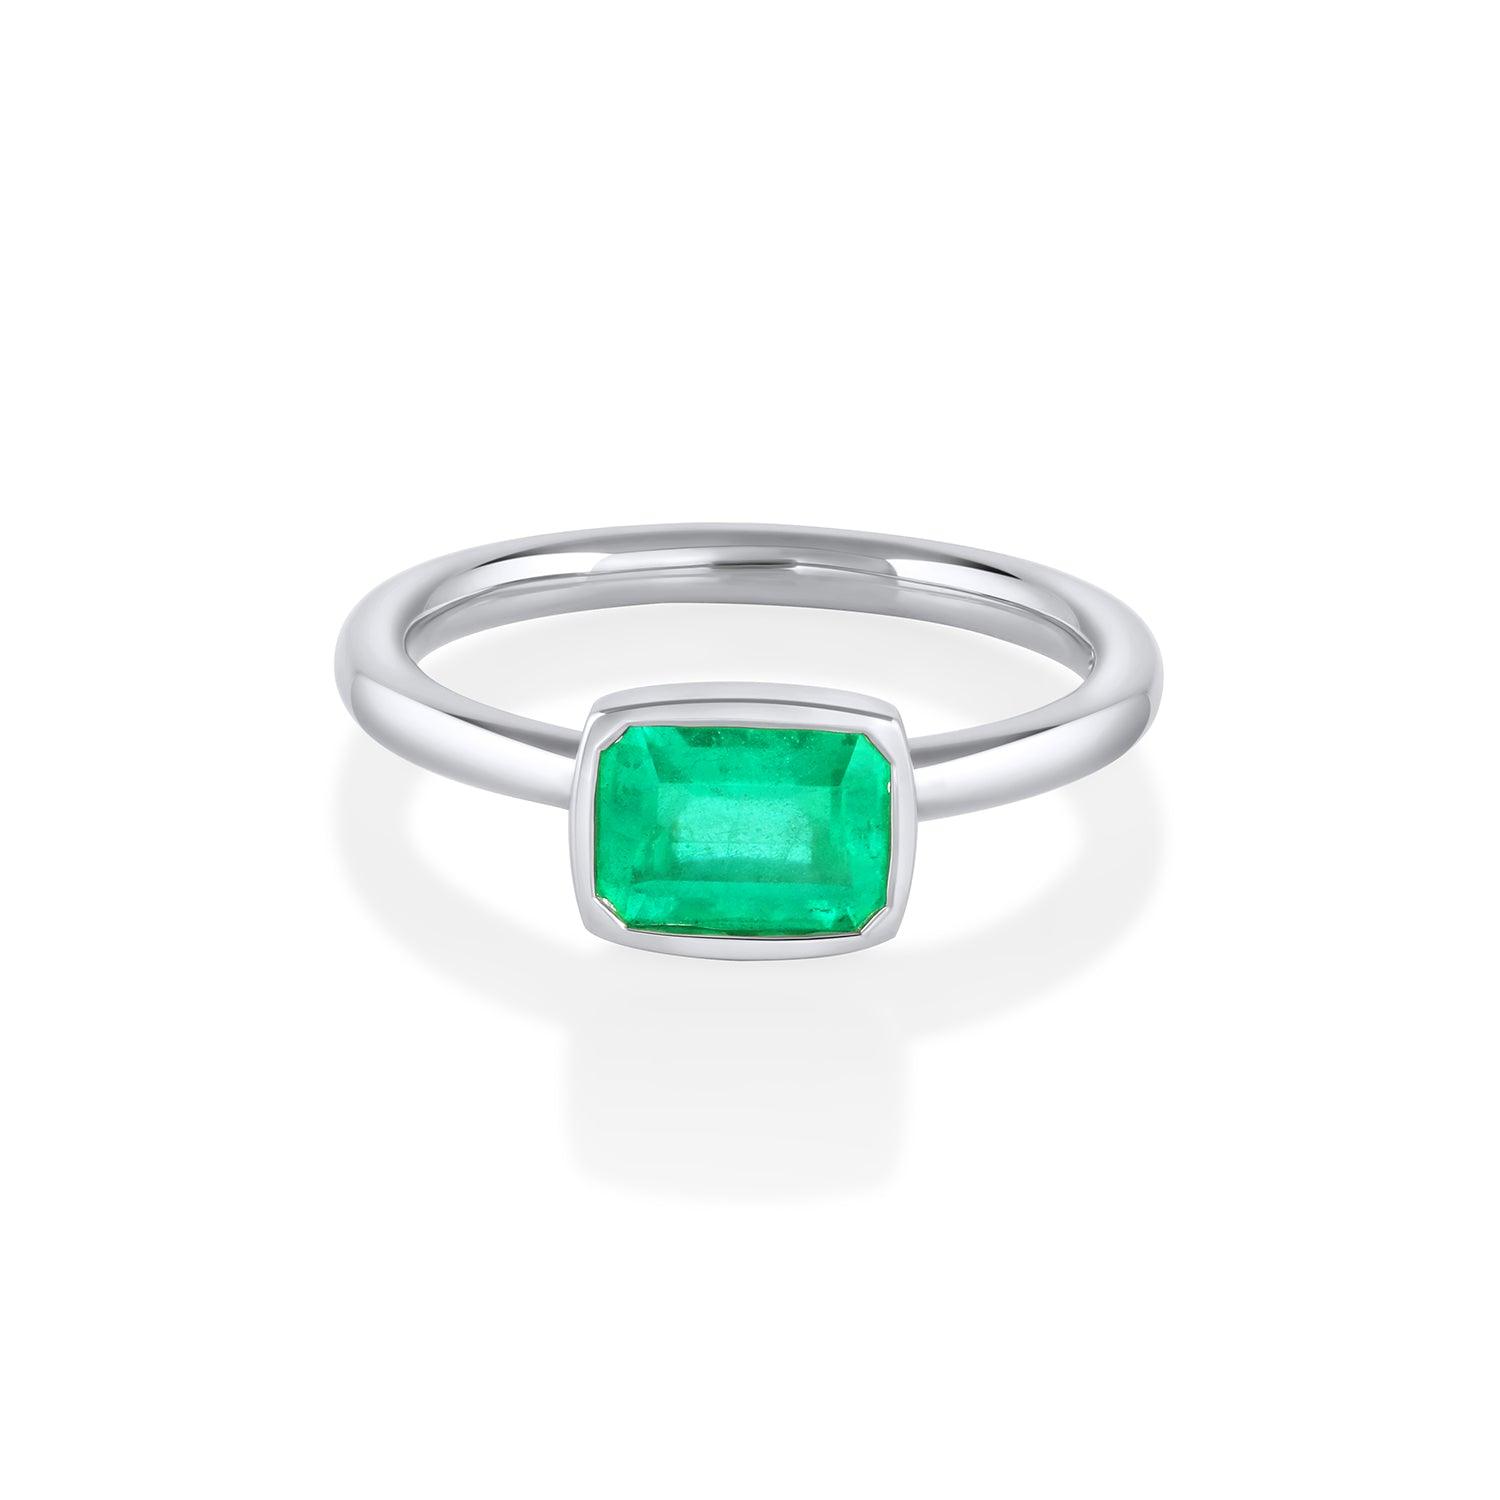 The Mini Roxy Engagement Ring East-West - Marrow Fine